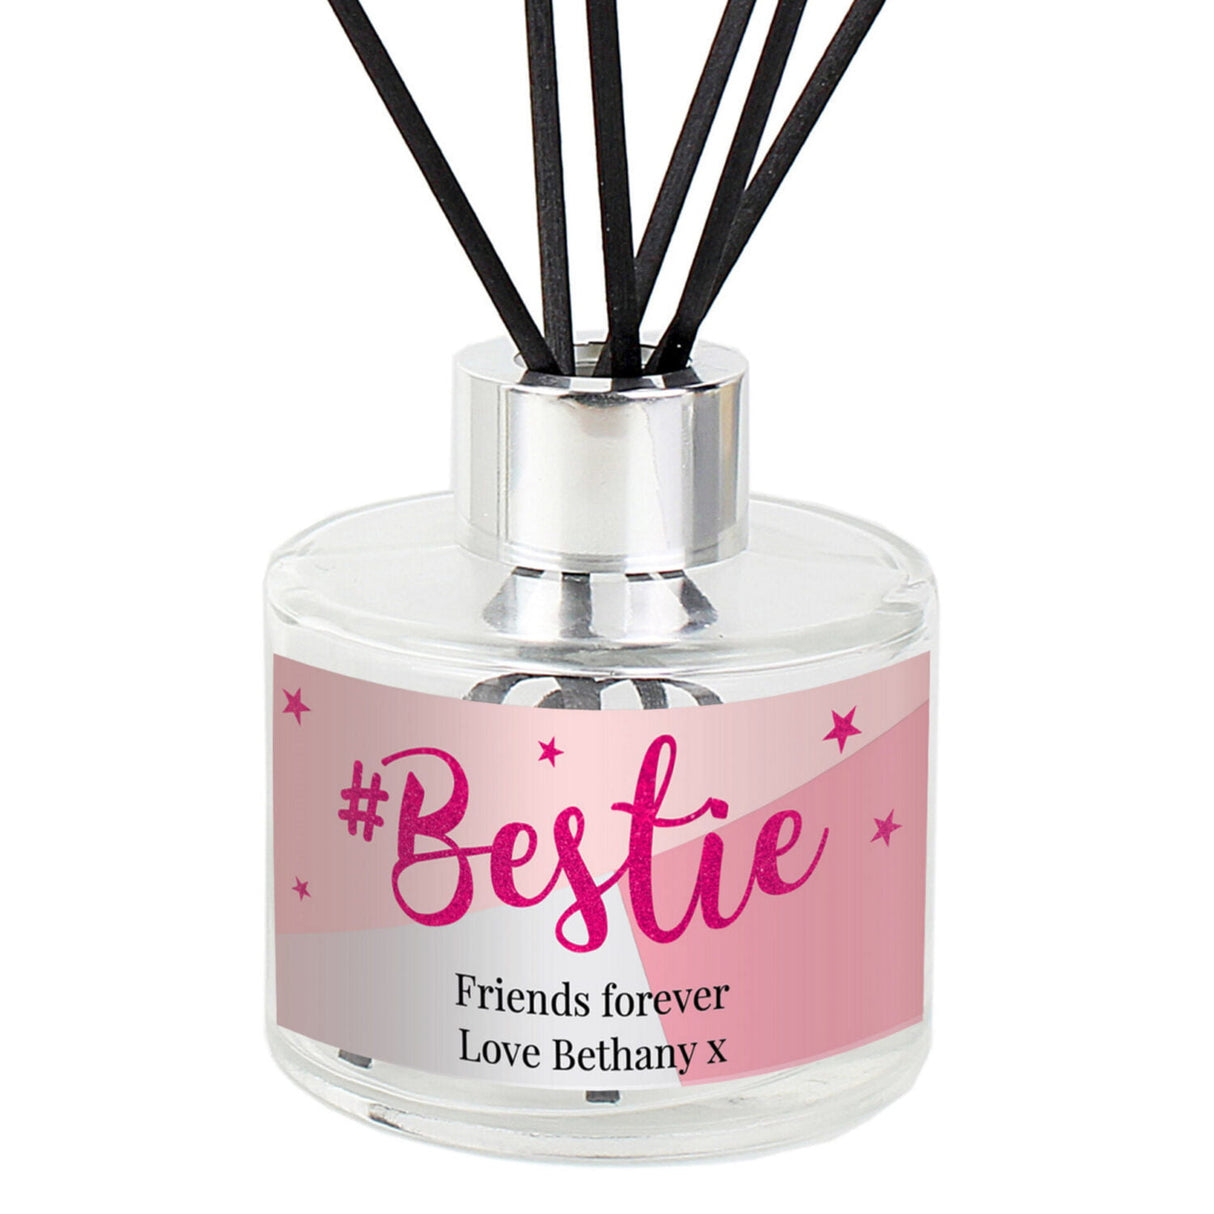 #Bestie Reed Diffuser - Gift Moments